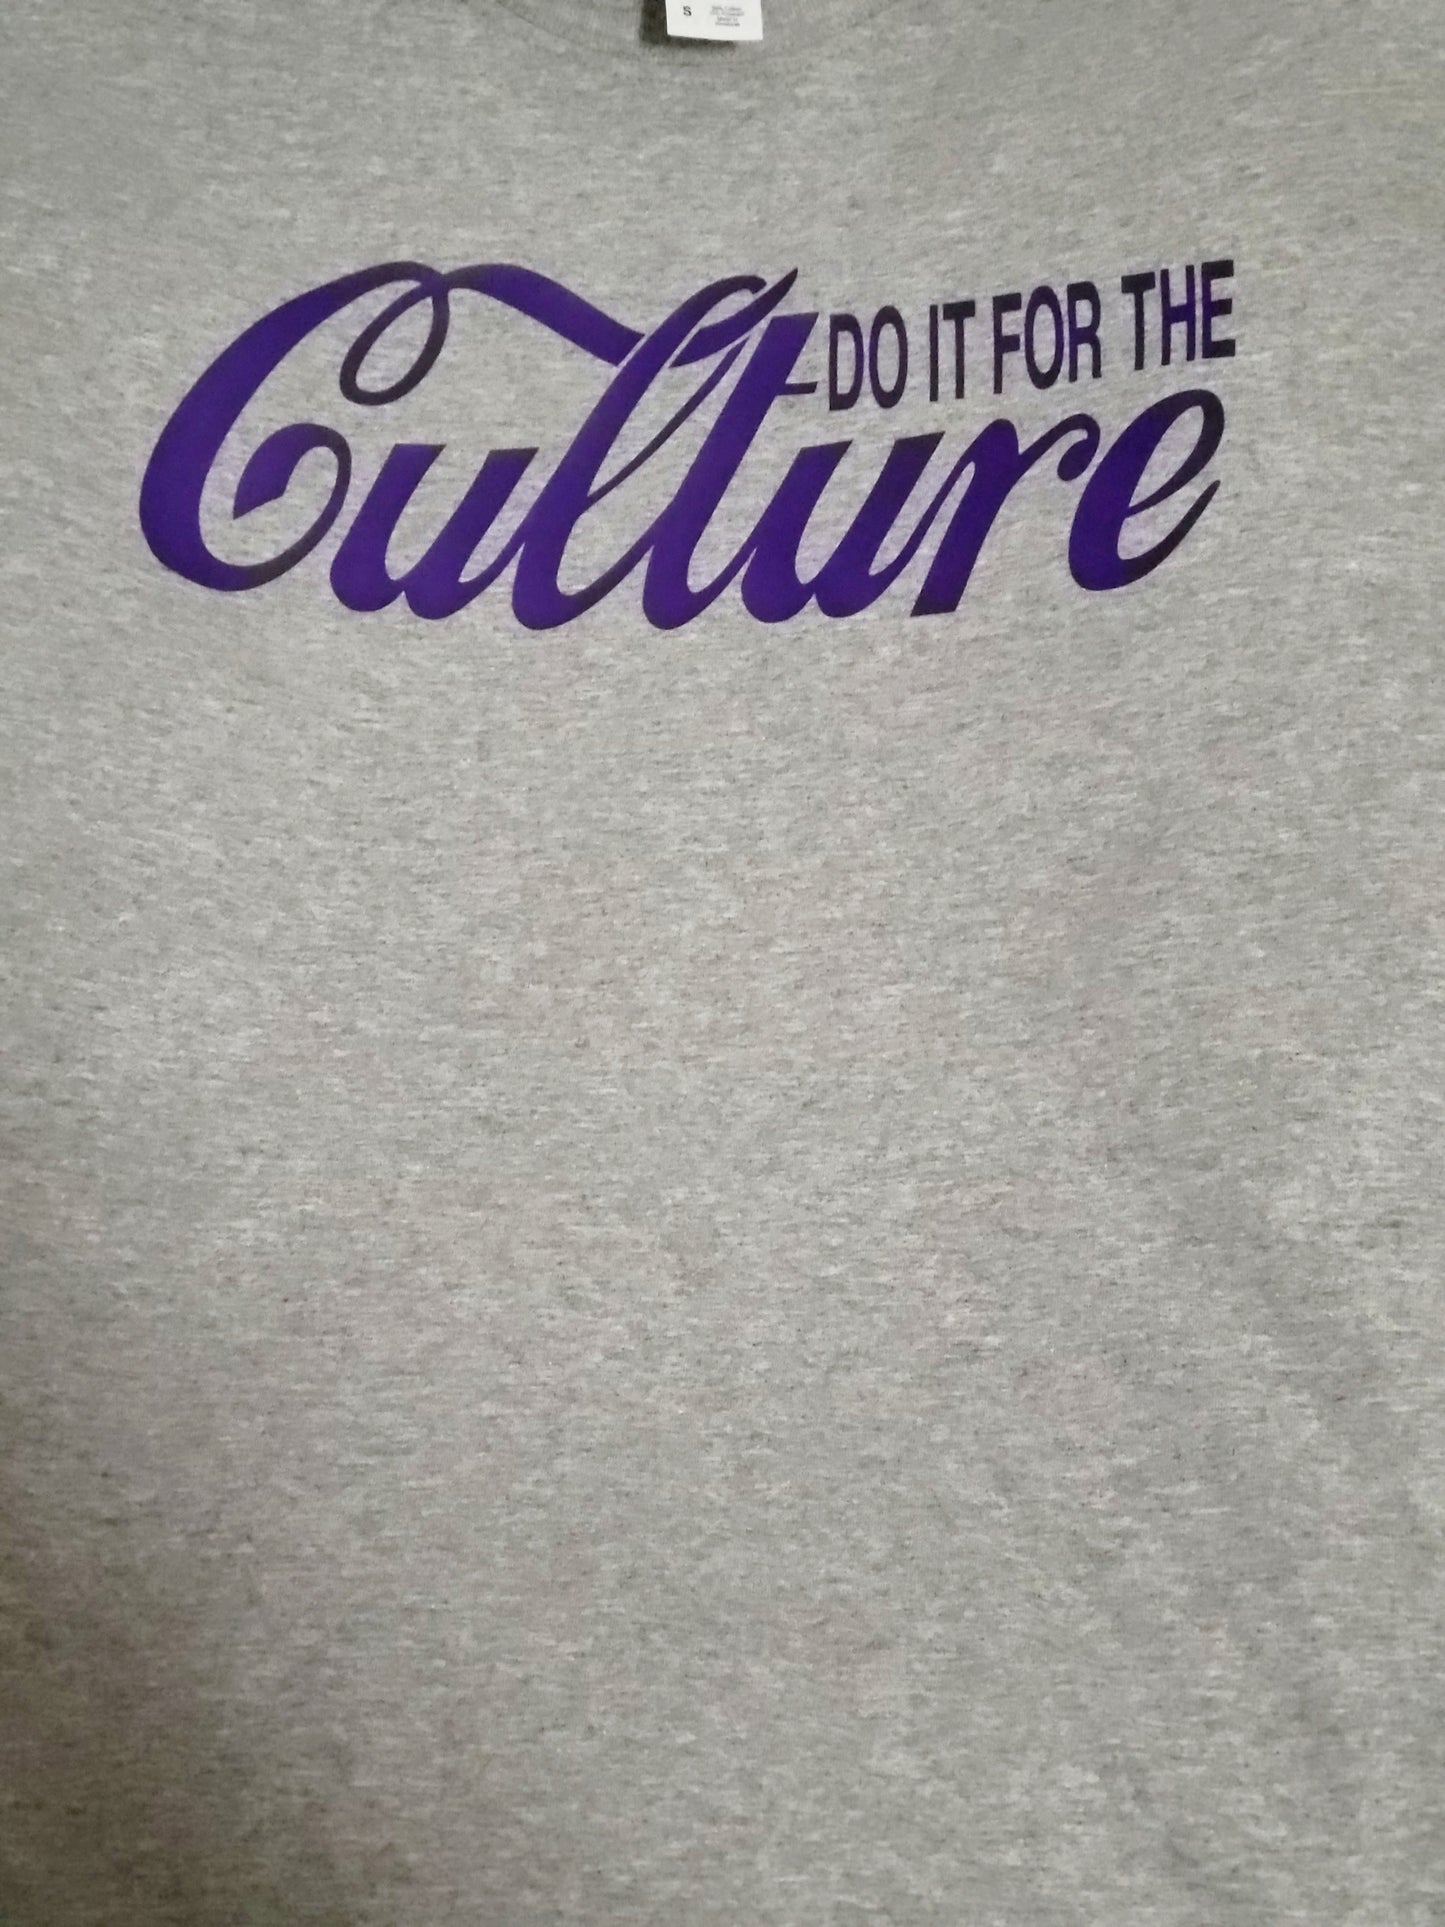 Do It For the Culture